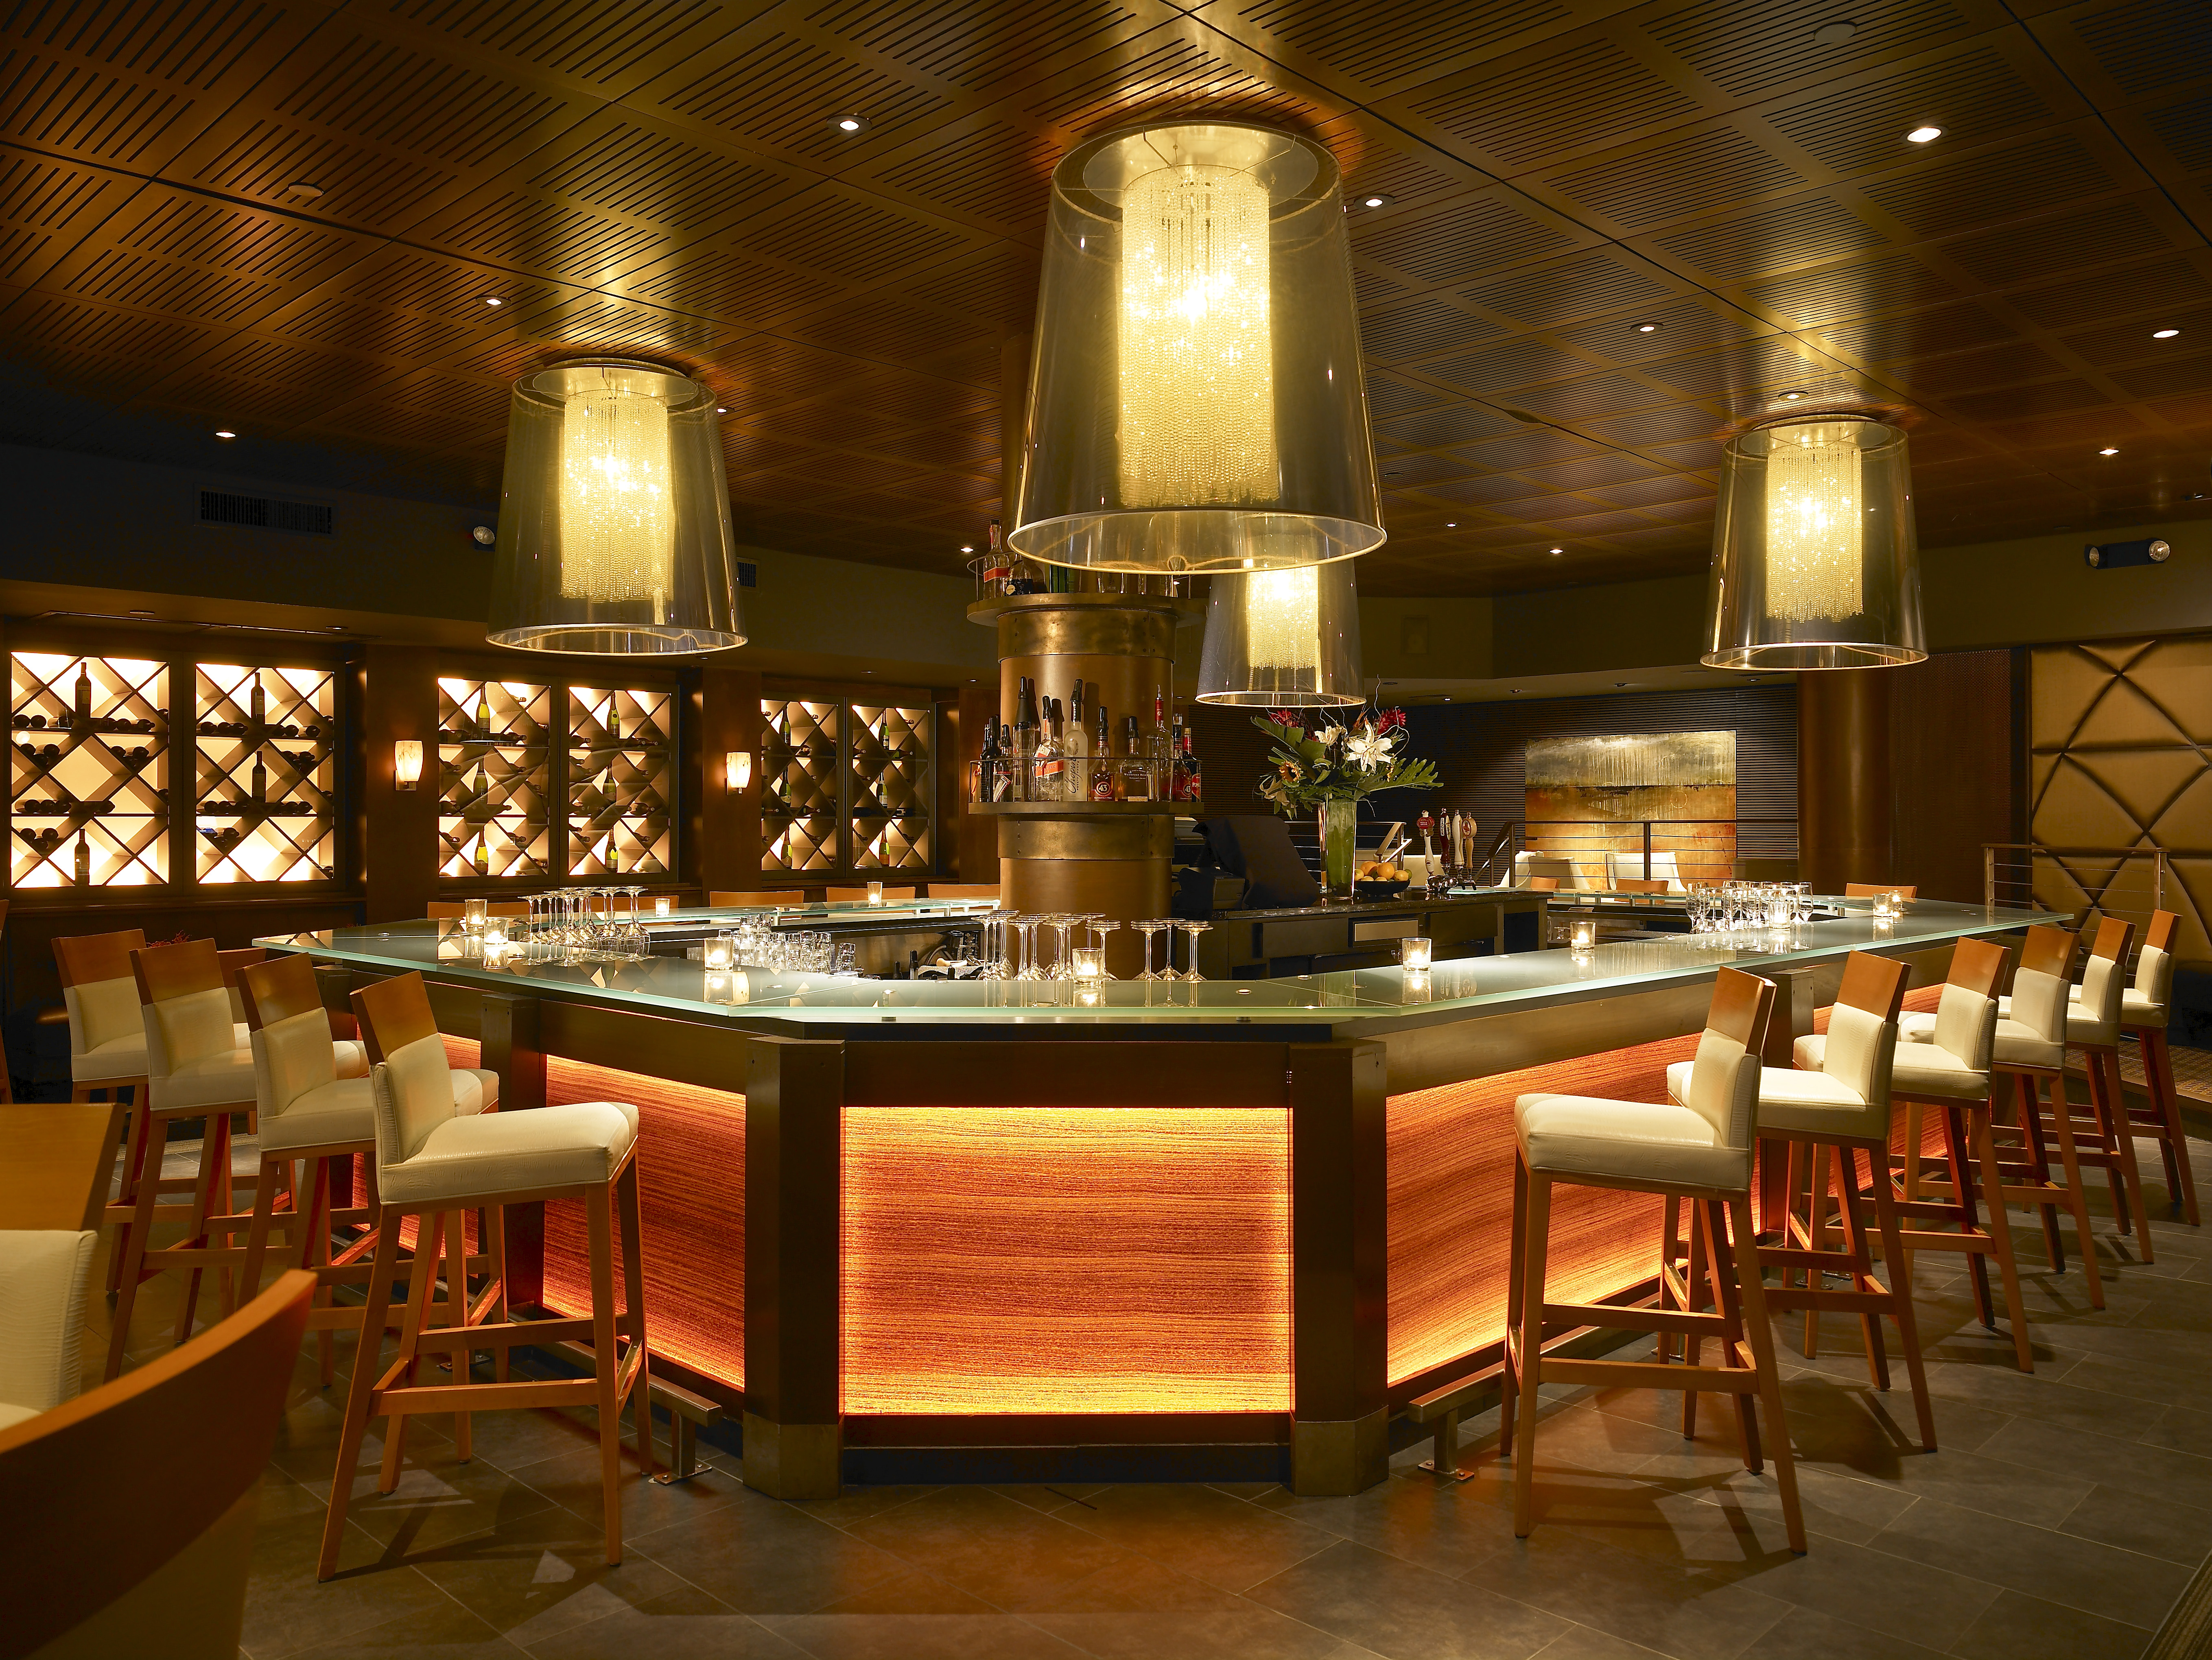 commercial hospitality interior design projects by j banks include luxury dining venues